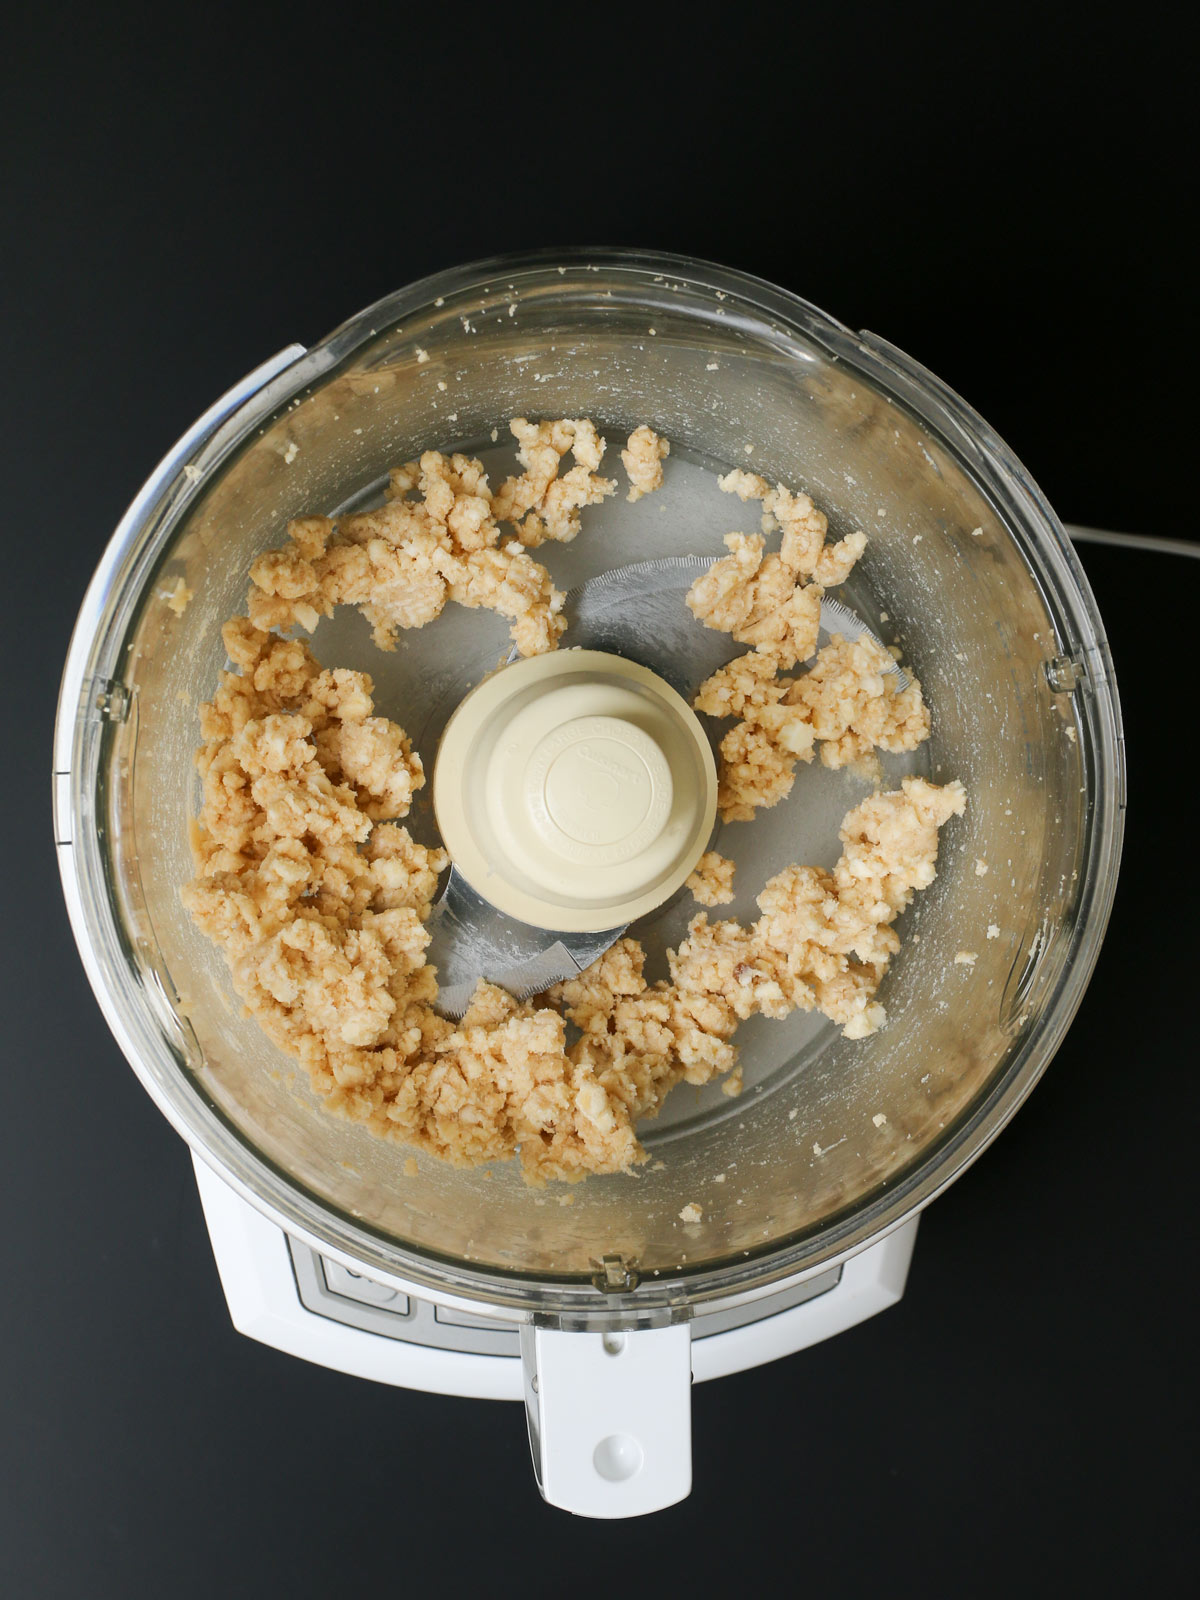 butter and sugar creamed together in food processor.